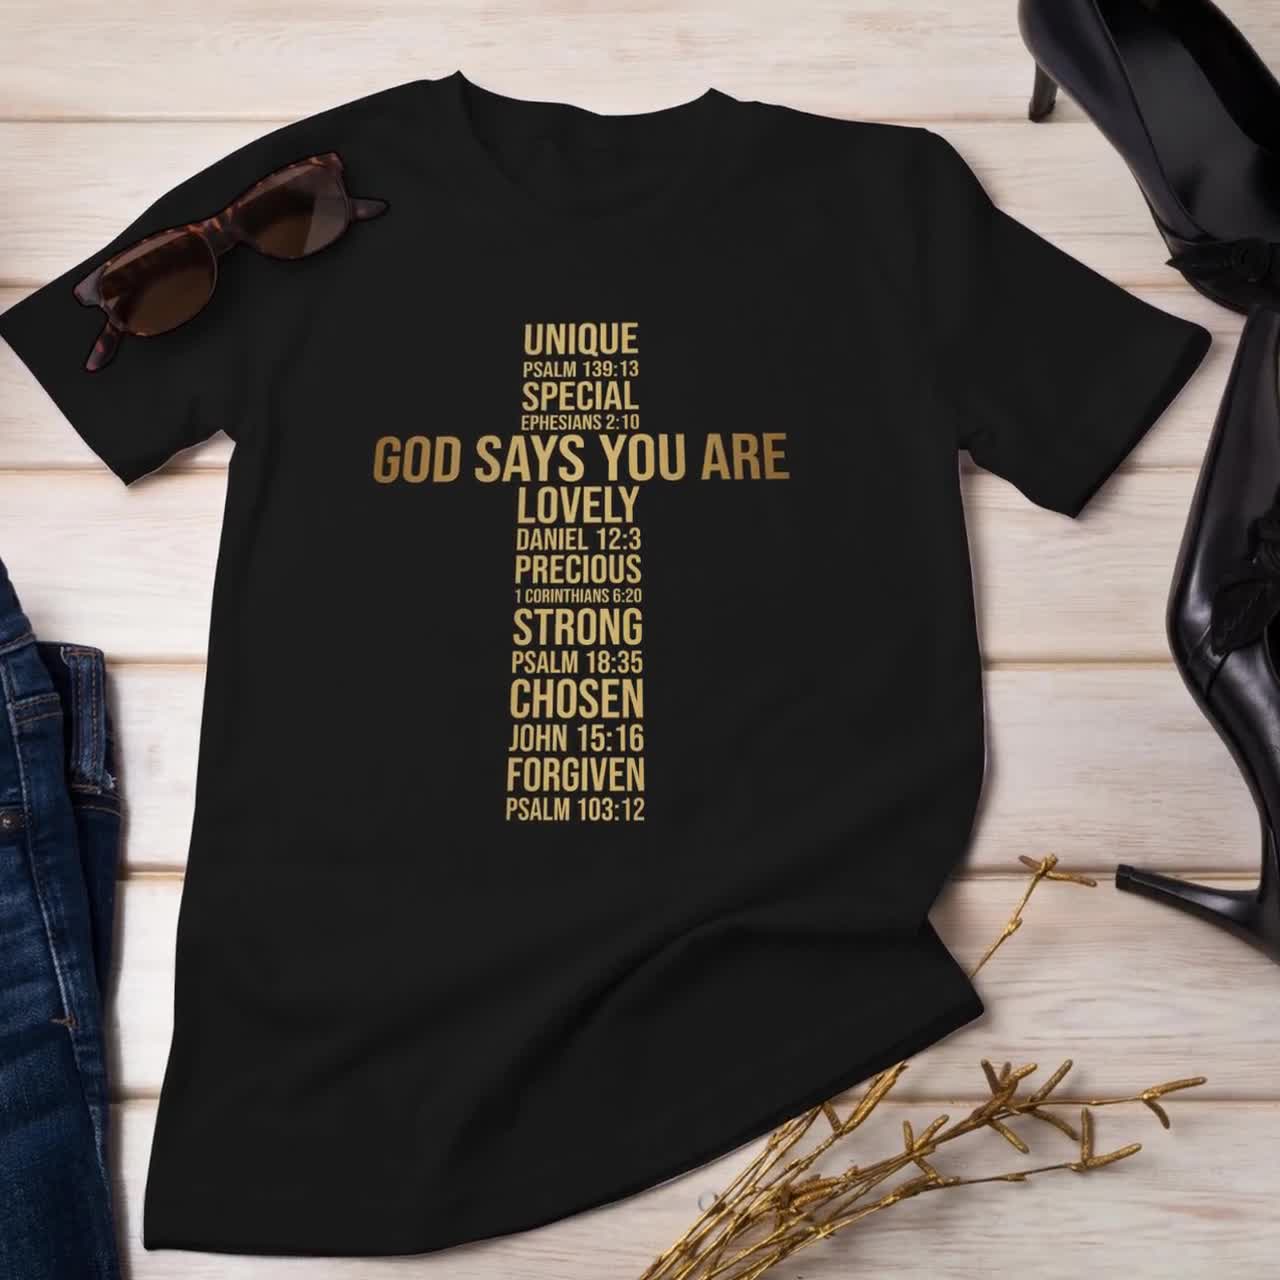 Fishing Shirt, God Says You Are Unique Psalm 139:13 Special